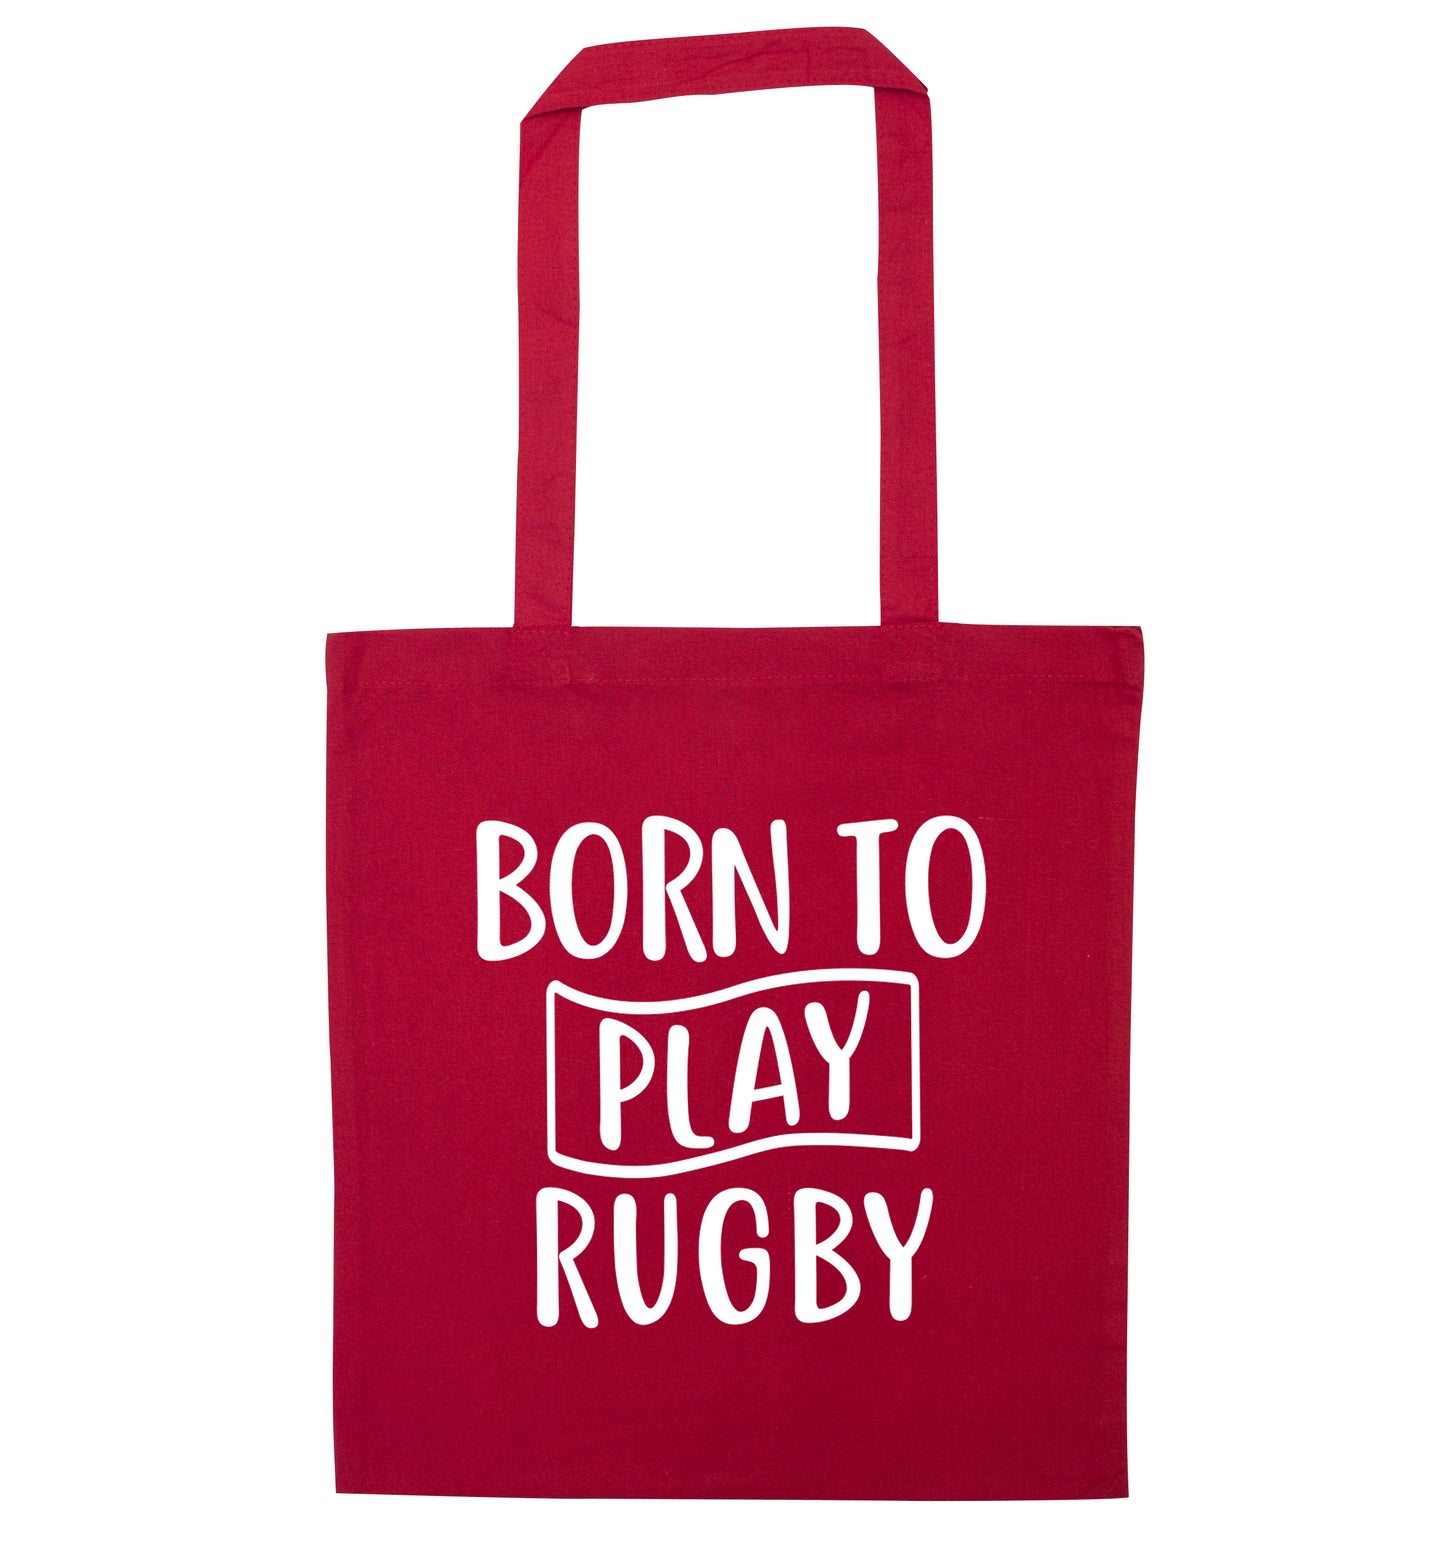 Born to play rugby red tote bag